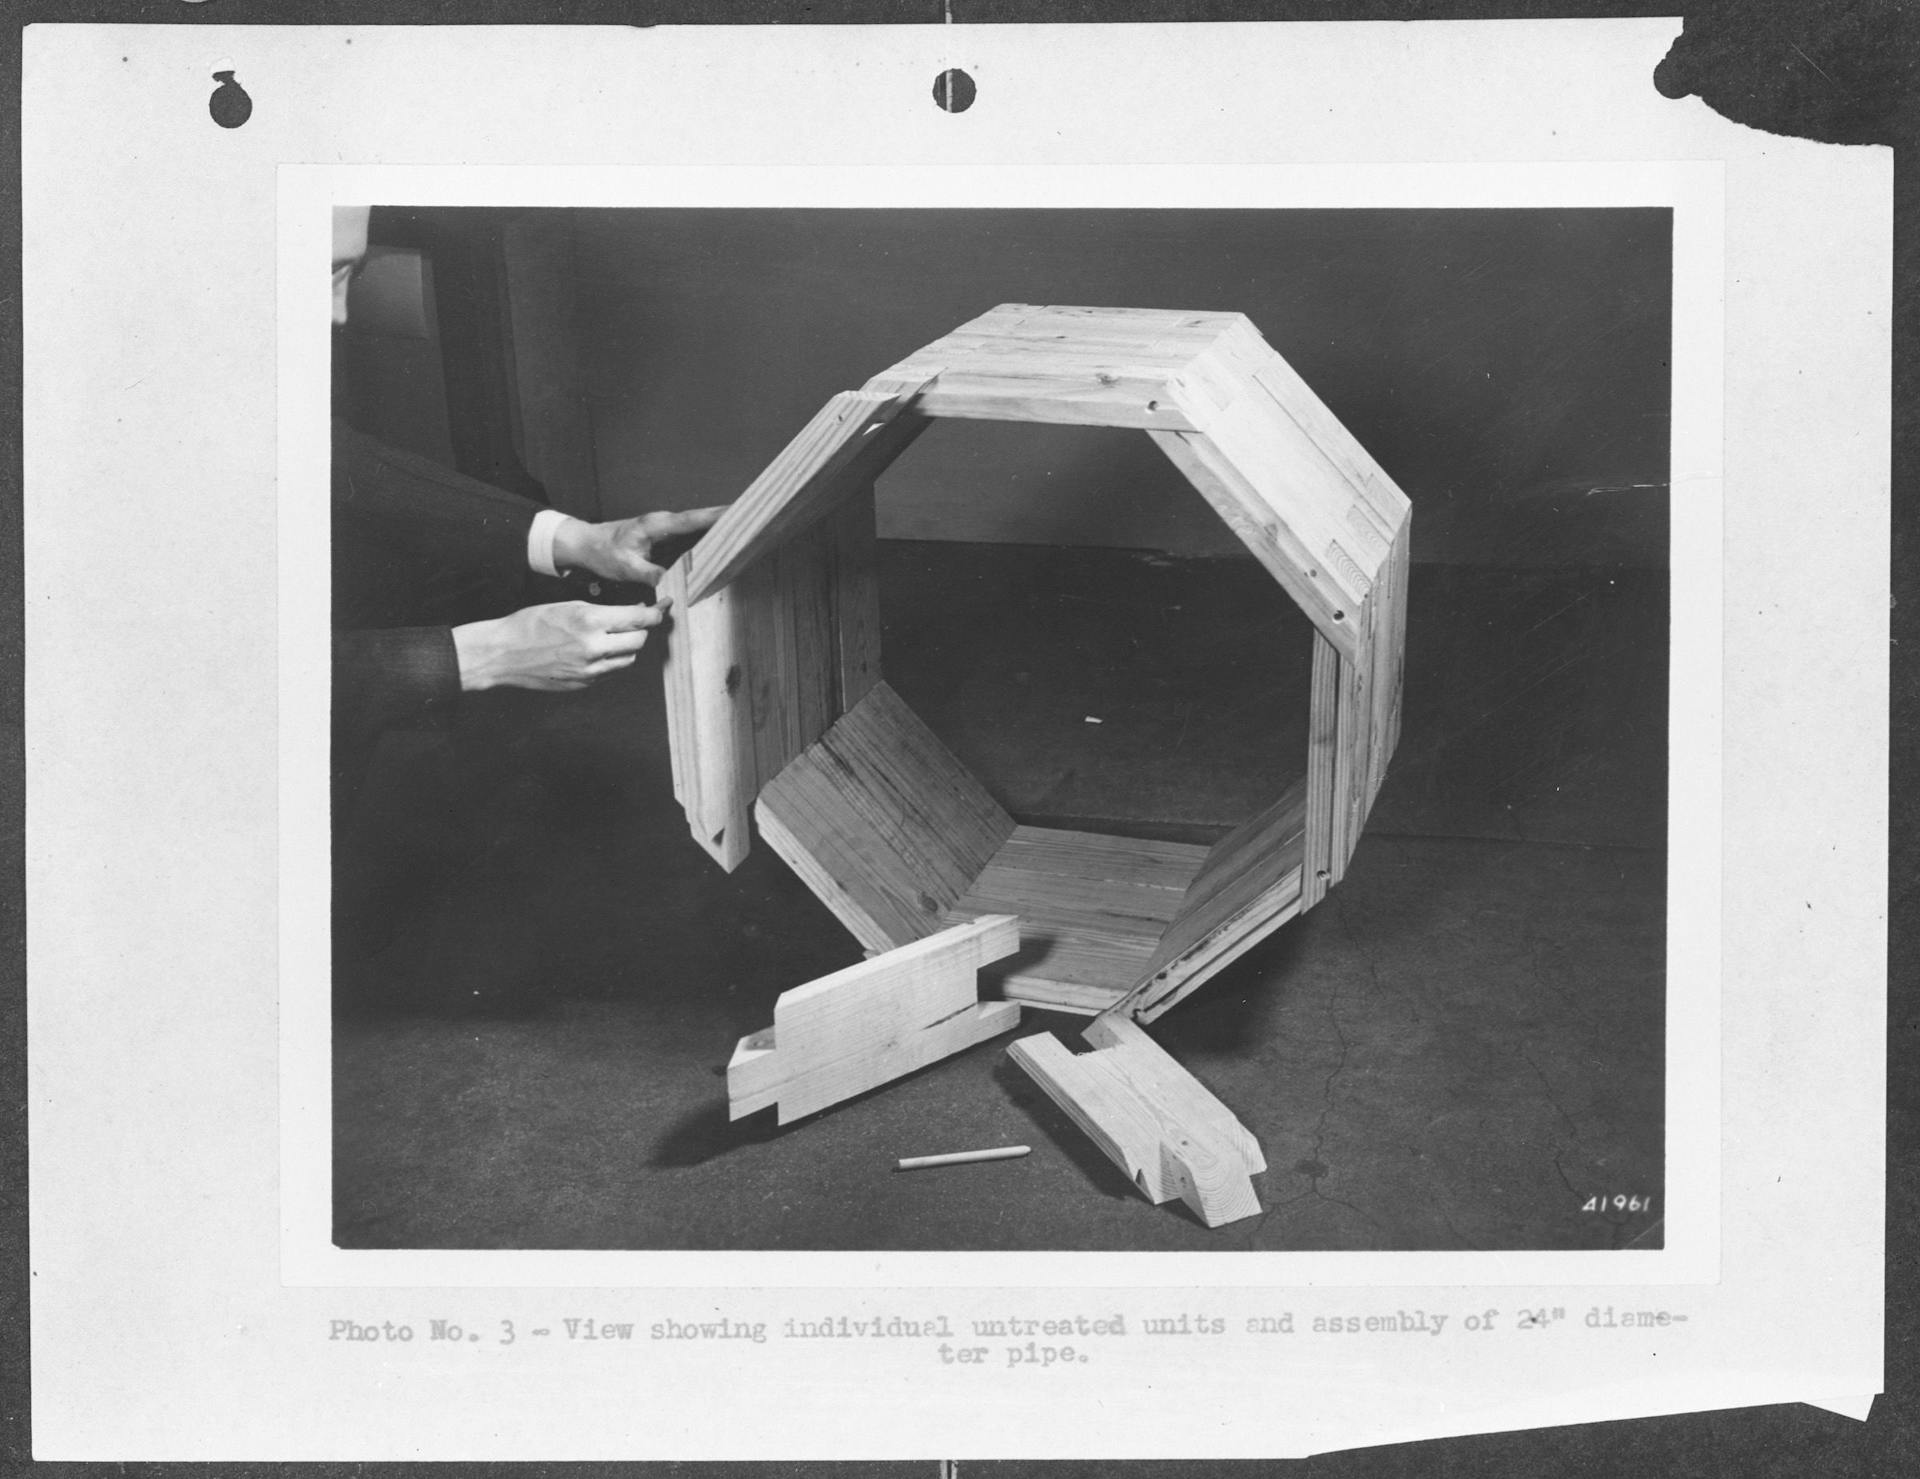 Substitute materials. Wood culverts for steel. Assembly of an emergency sectional wood pipe, twenty-four inches in diameter. These pipes, used in place of corrugated iron or reinforced concrete pipes, are made of sections cut from short lengths… 